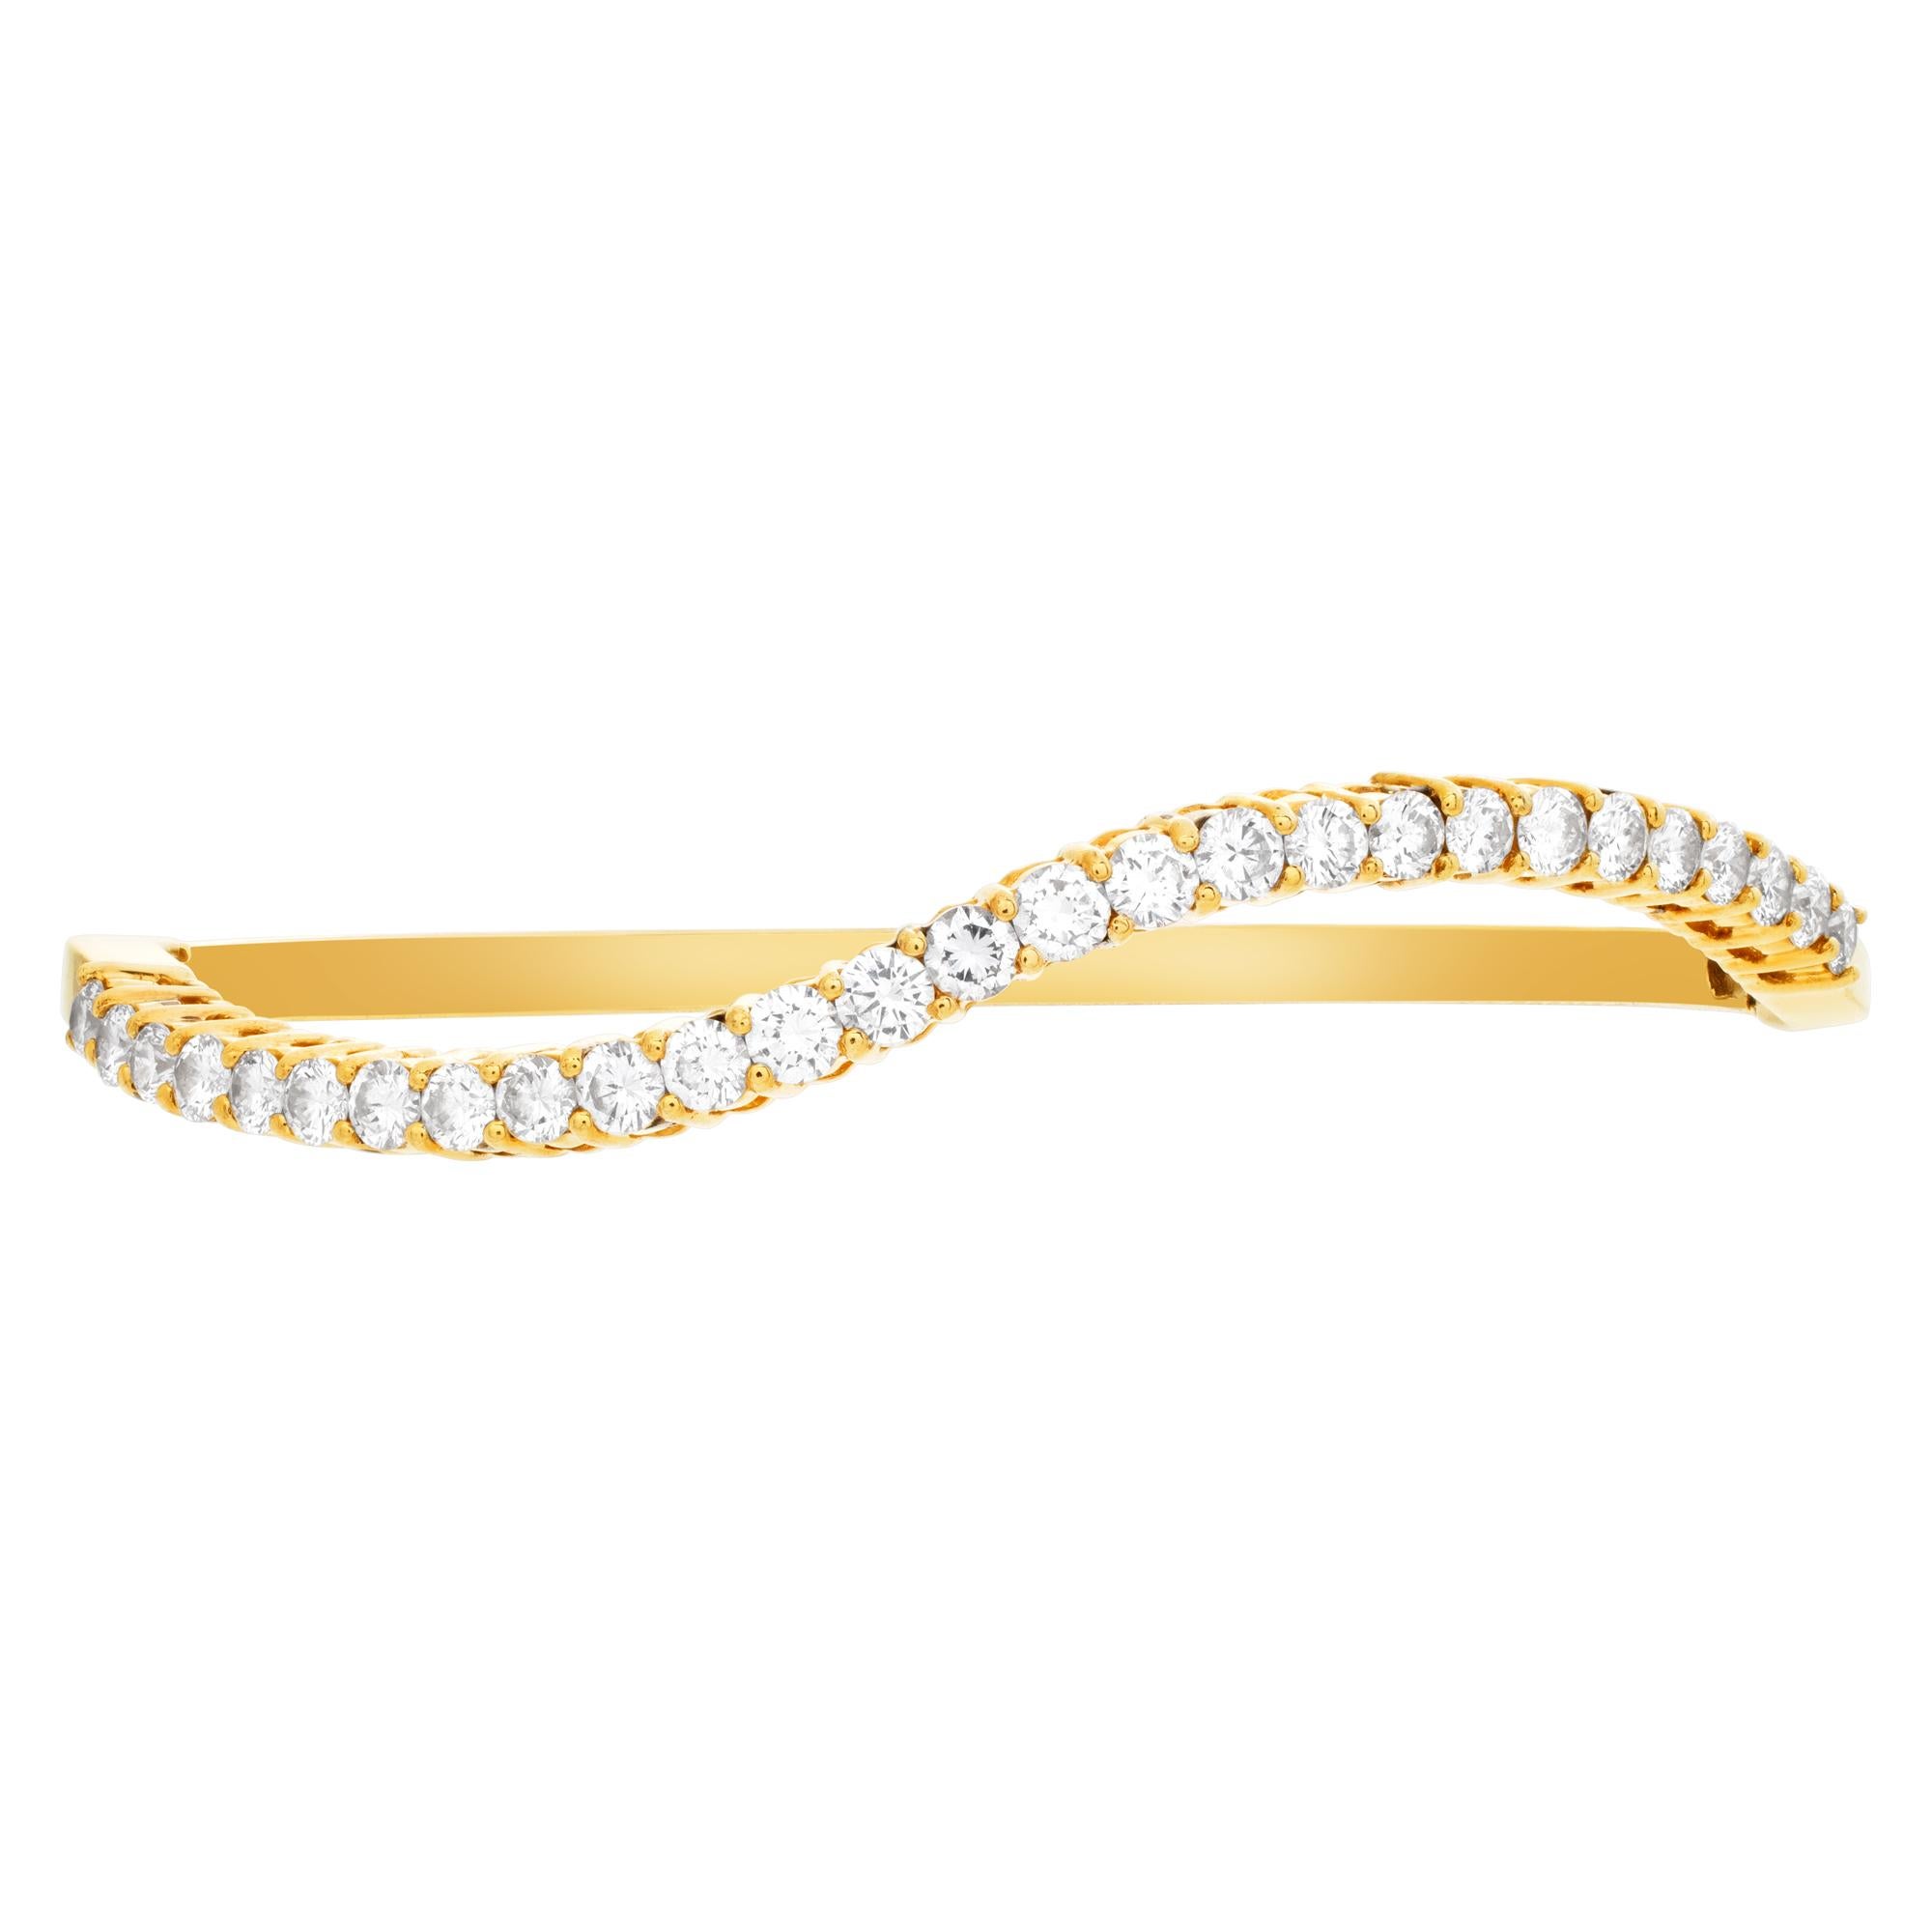 Beautiful wave diamond bangle in 18k gold with over 2.50 carats in round brilliant cut G-H color, VS-SI clarity diamonds. Fits 7-8 inches wrist.
